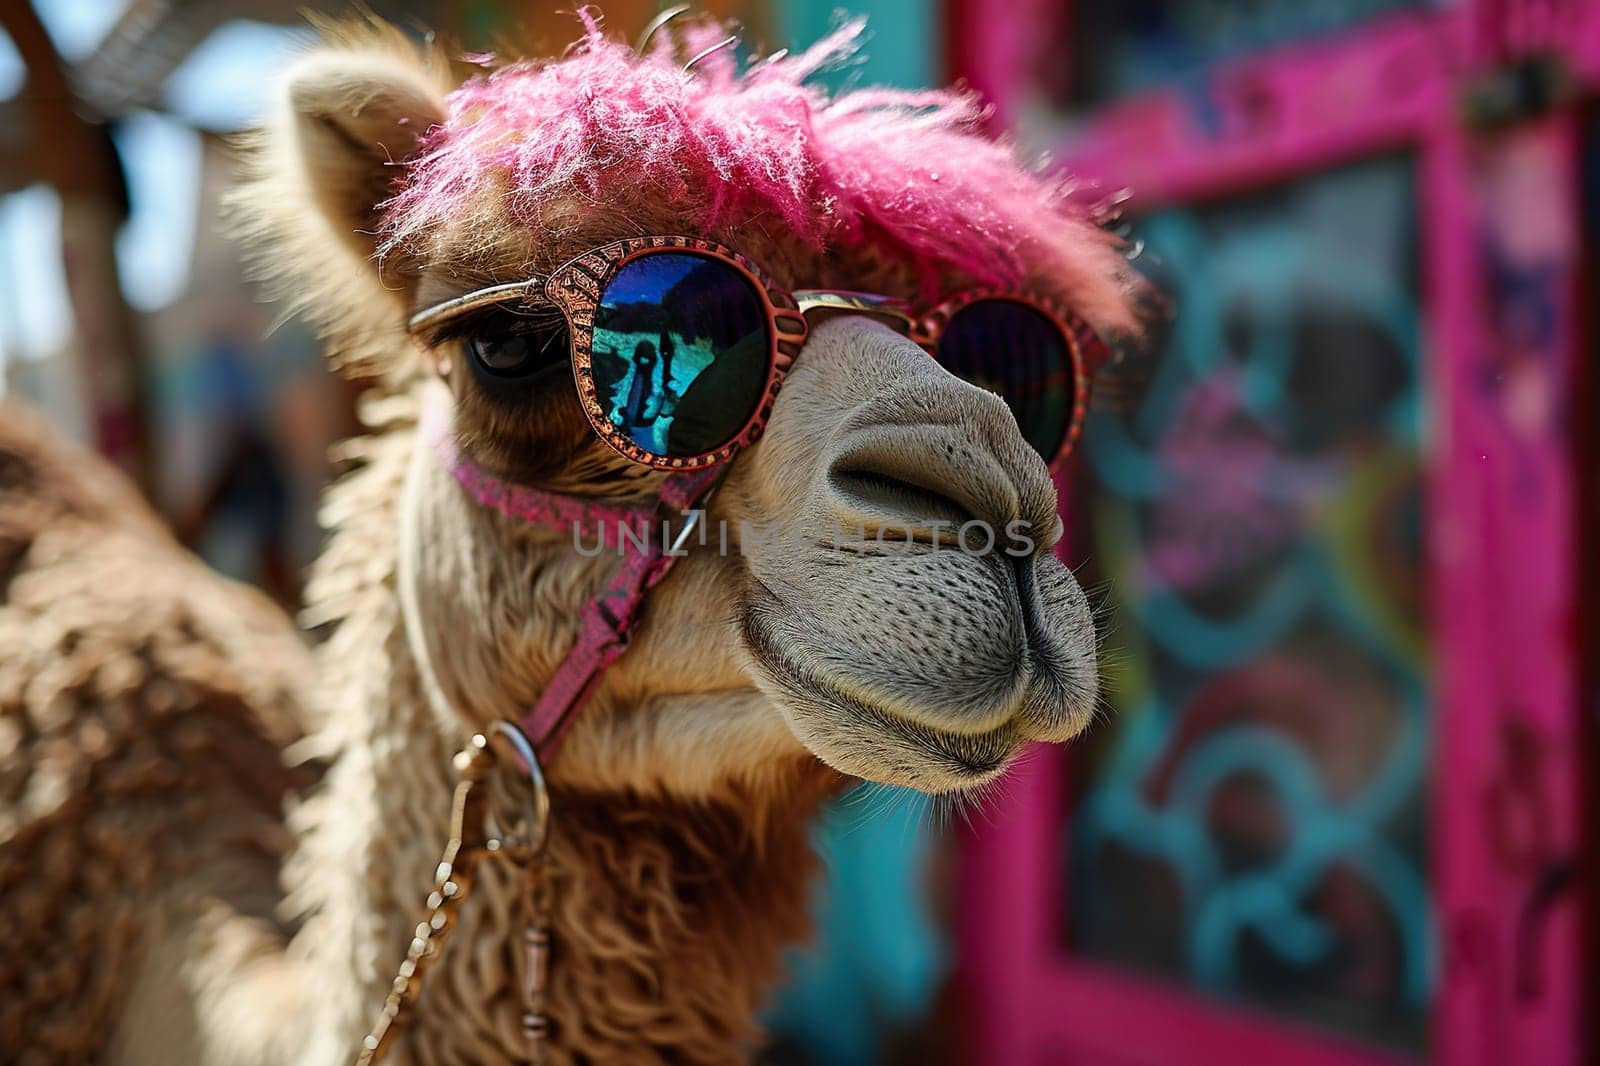 Hippie camel with a pink mane in sunglasses on a blurred background.